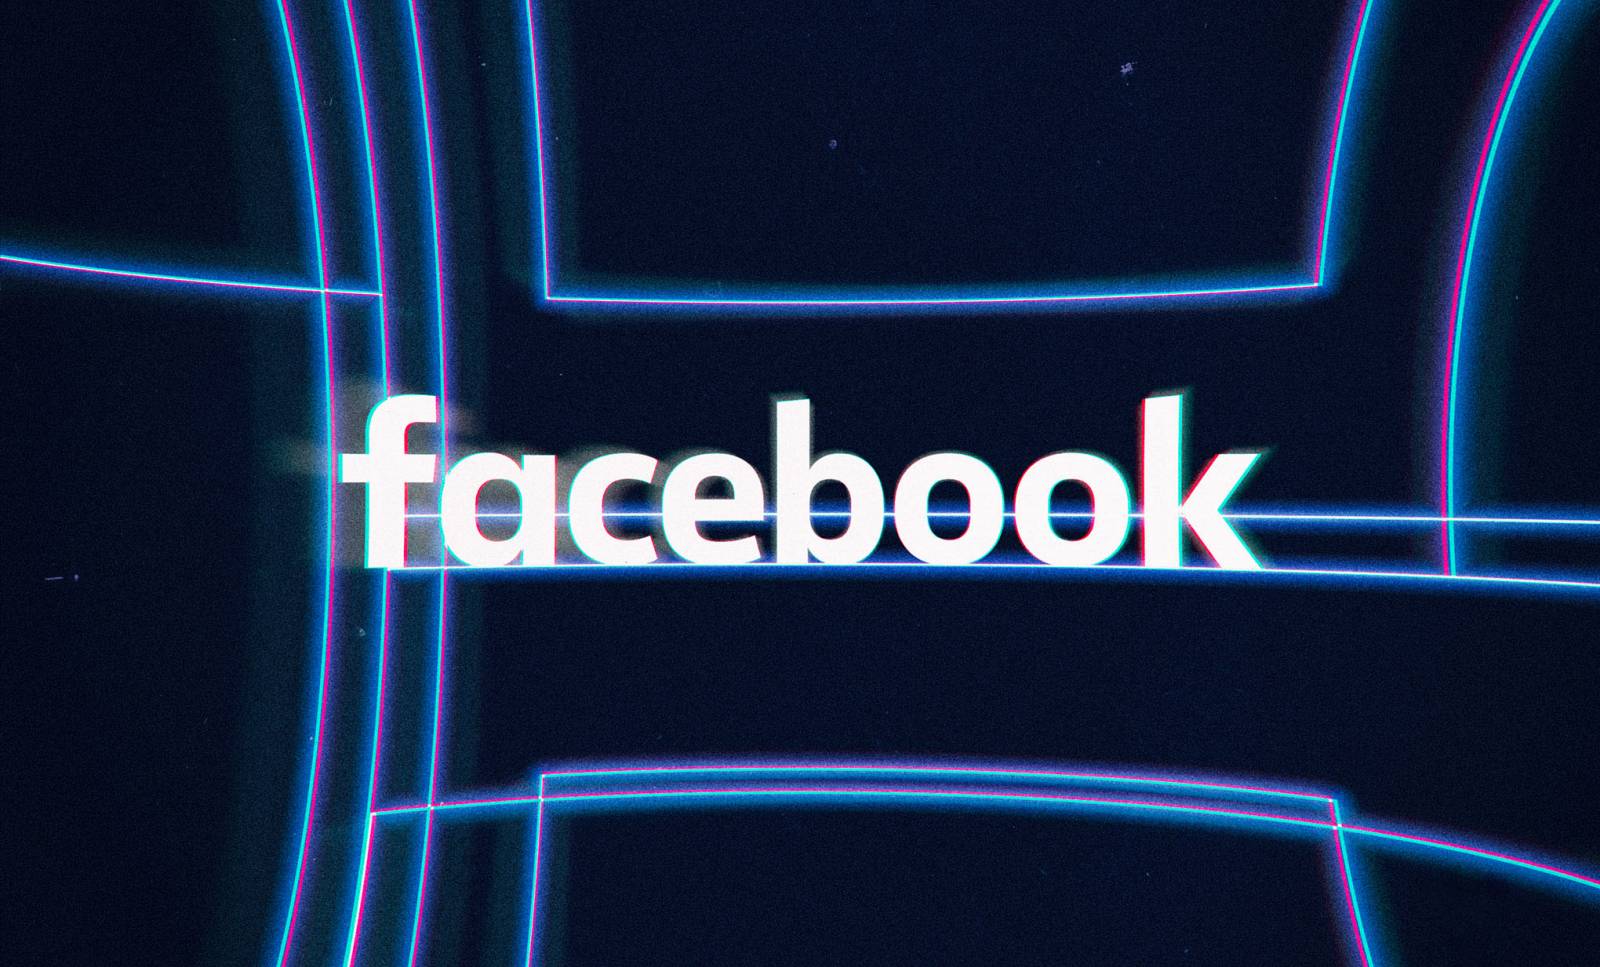 Facebook Closed An Incredible Number of Fake Accounts in Q4 2020